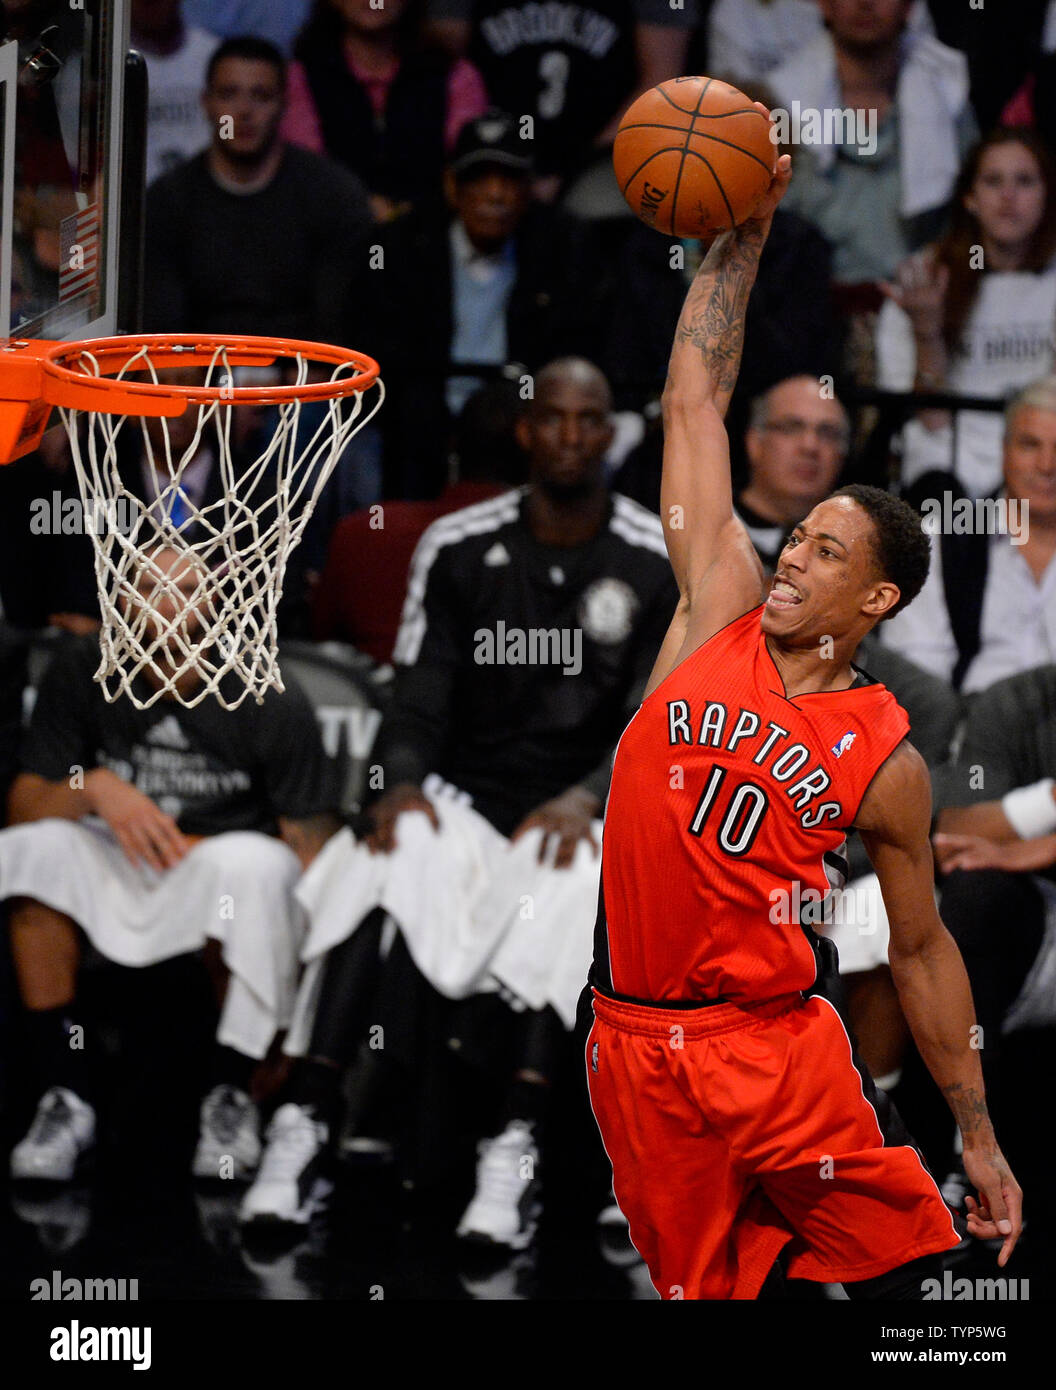 Toronto Raptors - Ball game. Huskies win! DeMar DeRozan (42, 8 & 7) helped  lead a furious comeback as we prevailed in OT & remain undefeated in the  Blue & Whites. #WeTheNorth